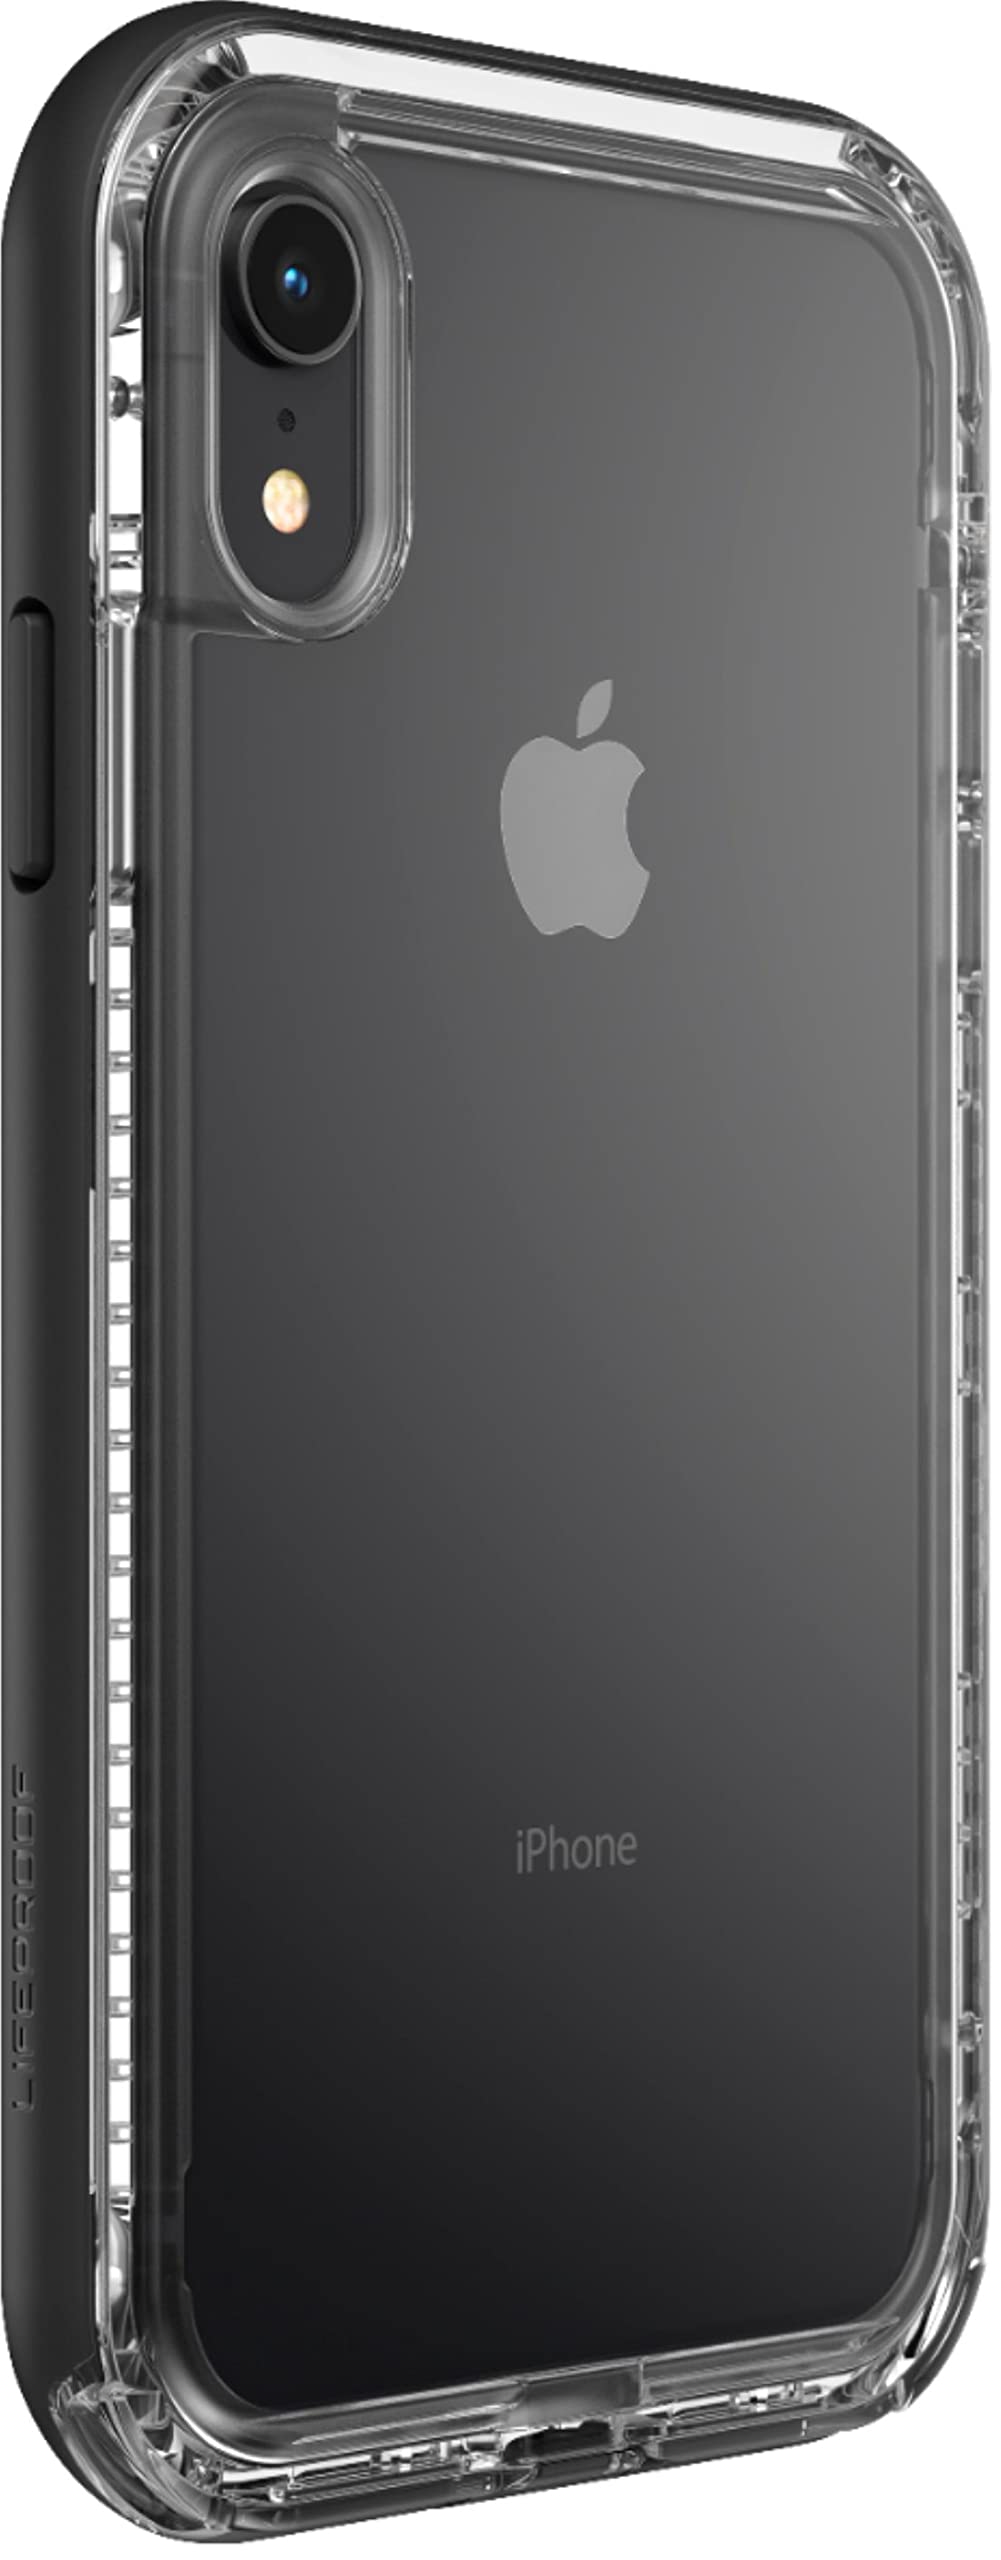 LifeProof Next Series Case for iPhone XR (Only) - Retail Packaging - Black Crystal (Clear/Black)